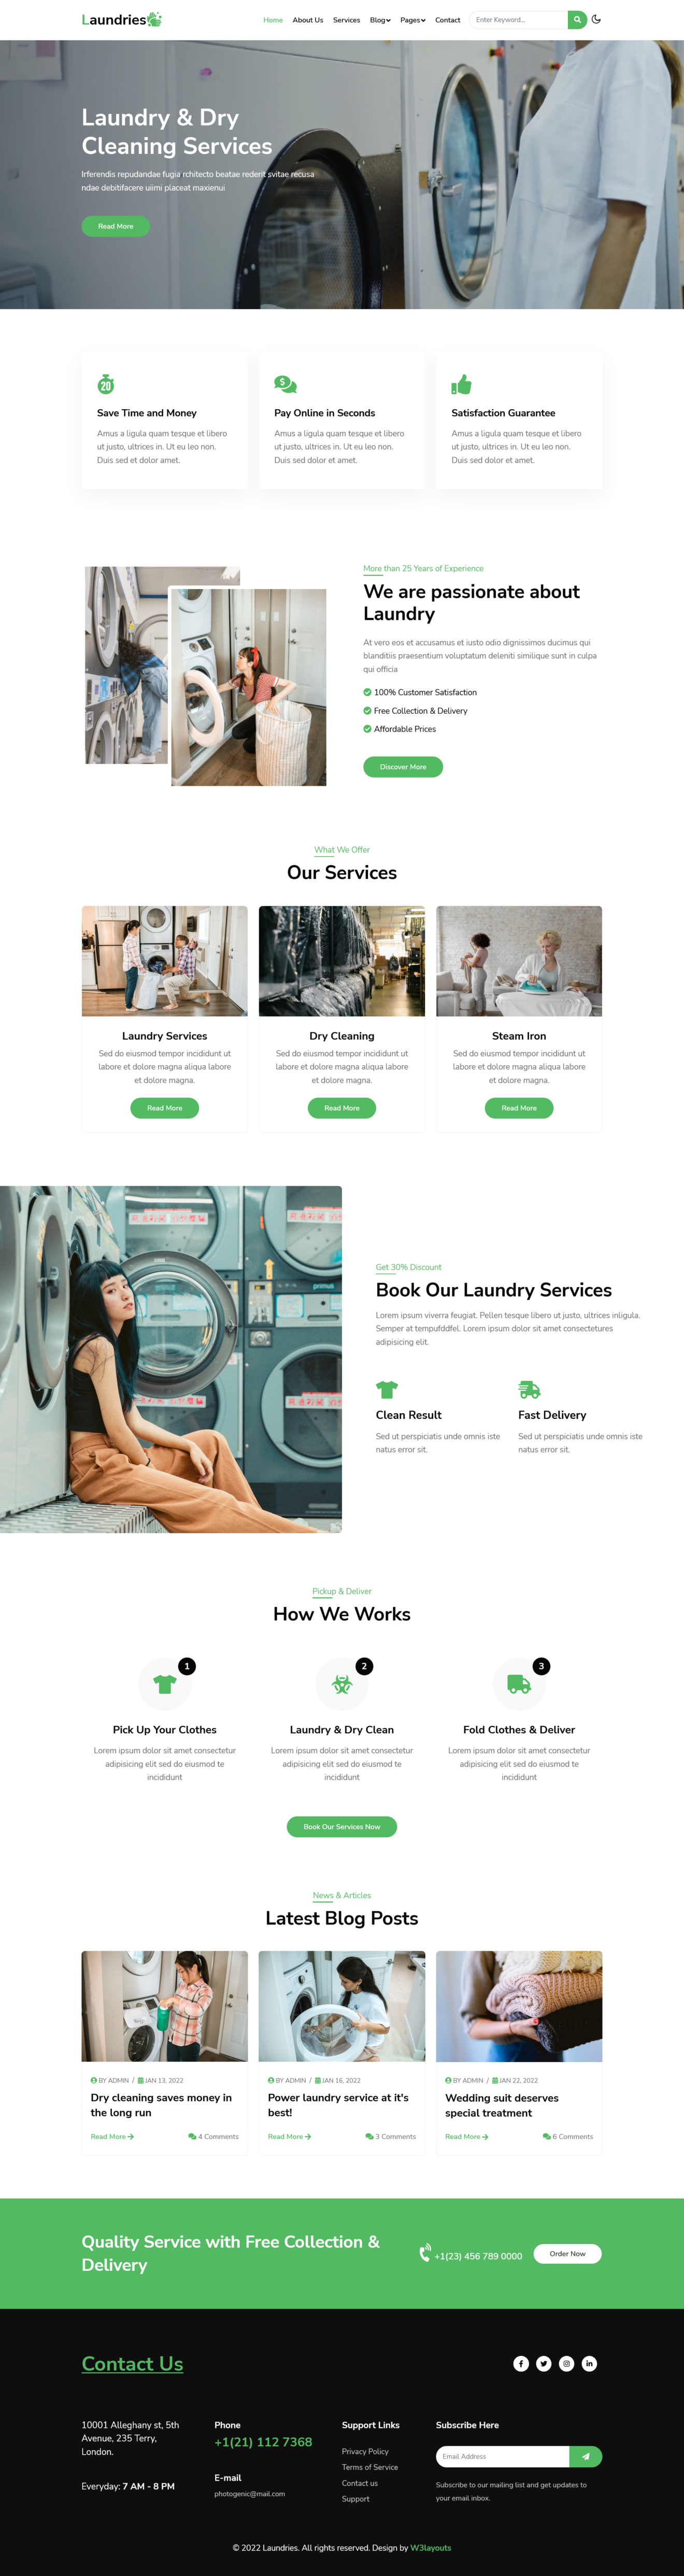 laundries website template home page